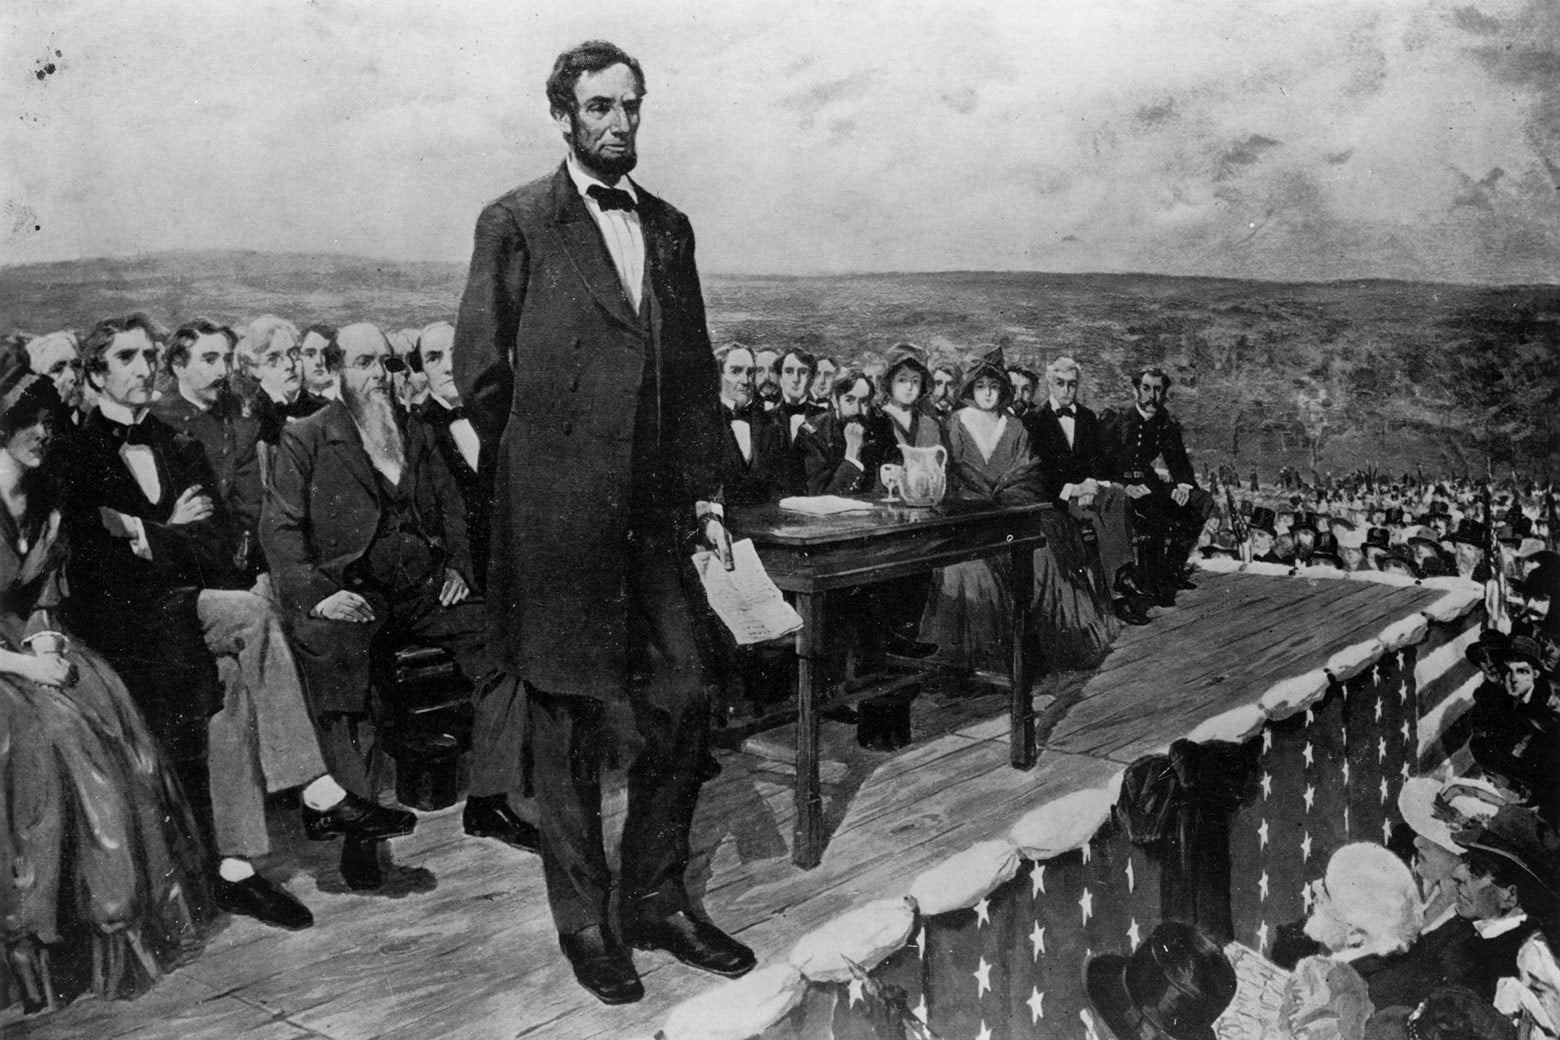 The history of Thanksgiving, Abraham Lincoln, and the Gettysburg Address.